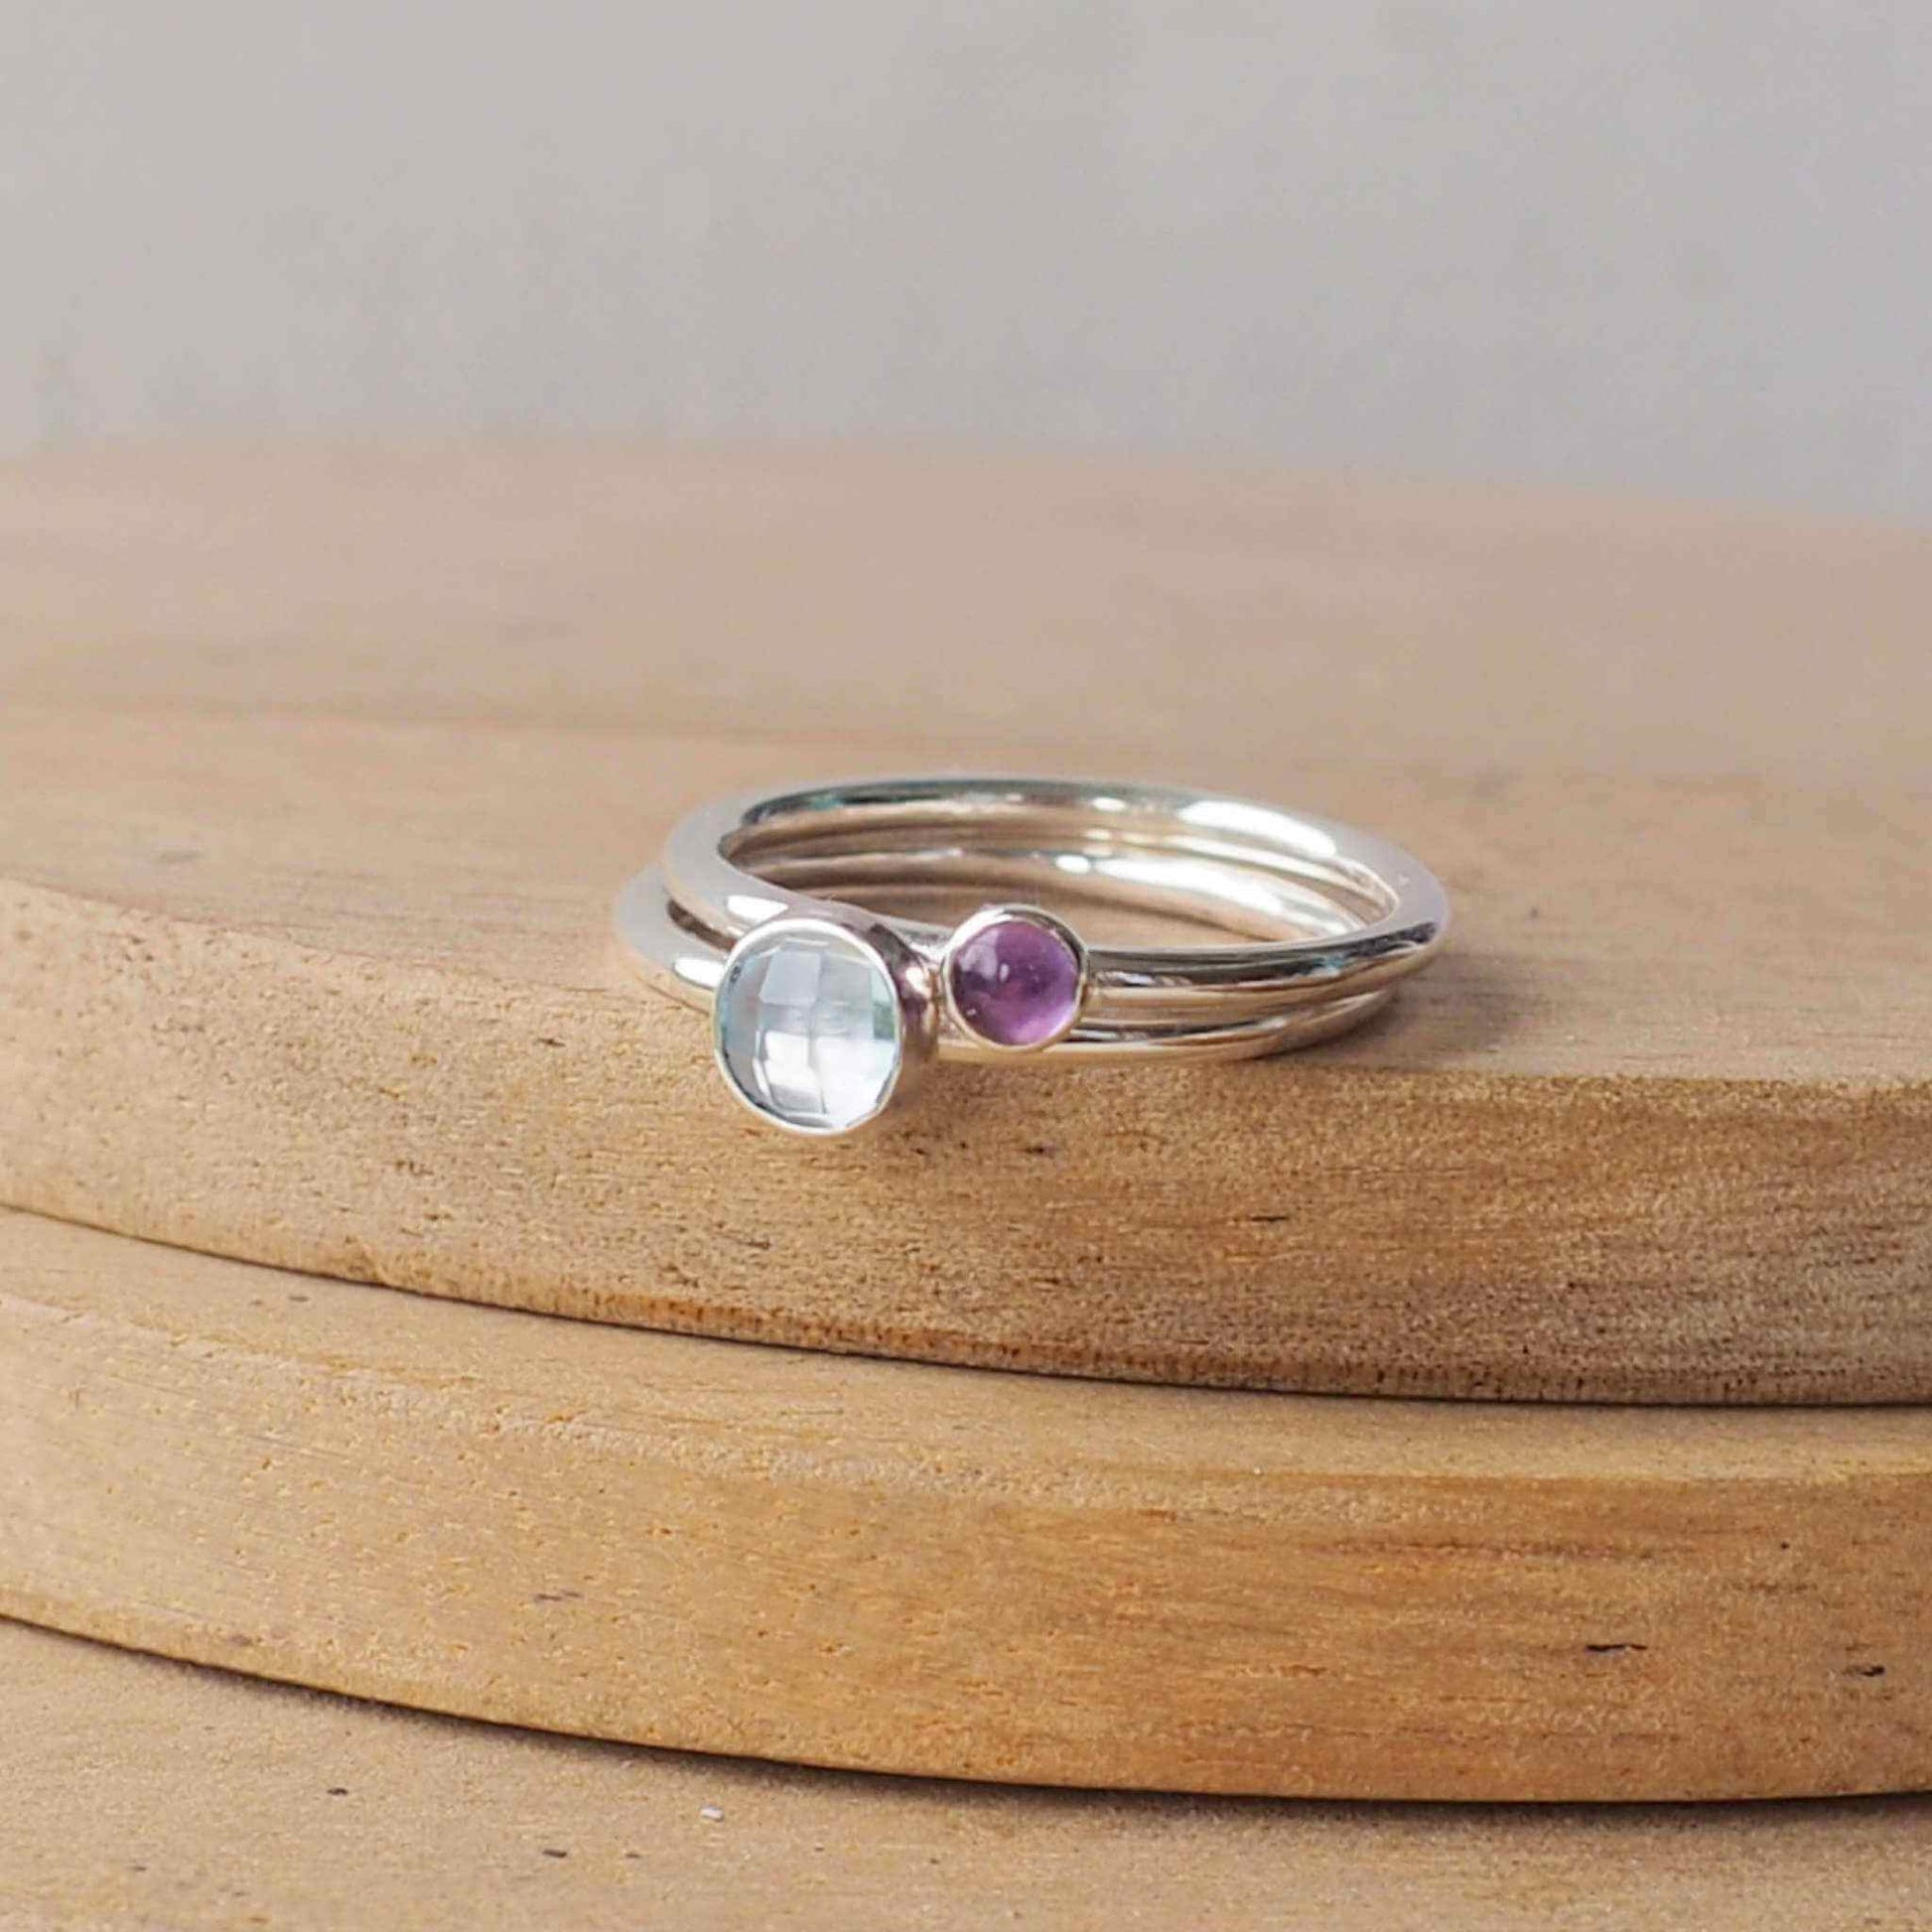 Two Birthstone Ring set with Blue Topaz and Amethyst to mark March and February Birthdays. The two rings are made with Sterling Silver and a 5mm blue round cabochon, with a further ring with 3mm round gem in a purple amethyst . Handmade in Scotland by maram jewellery